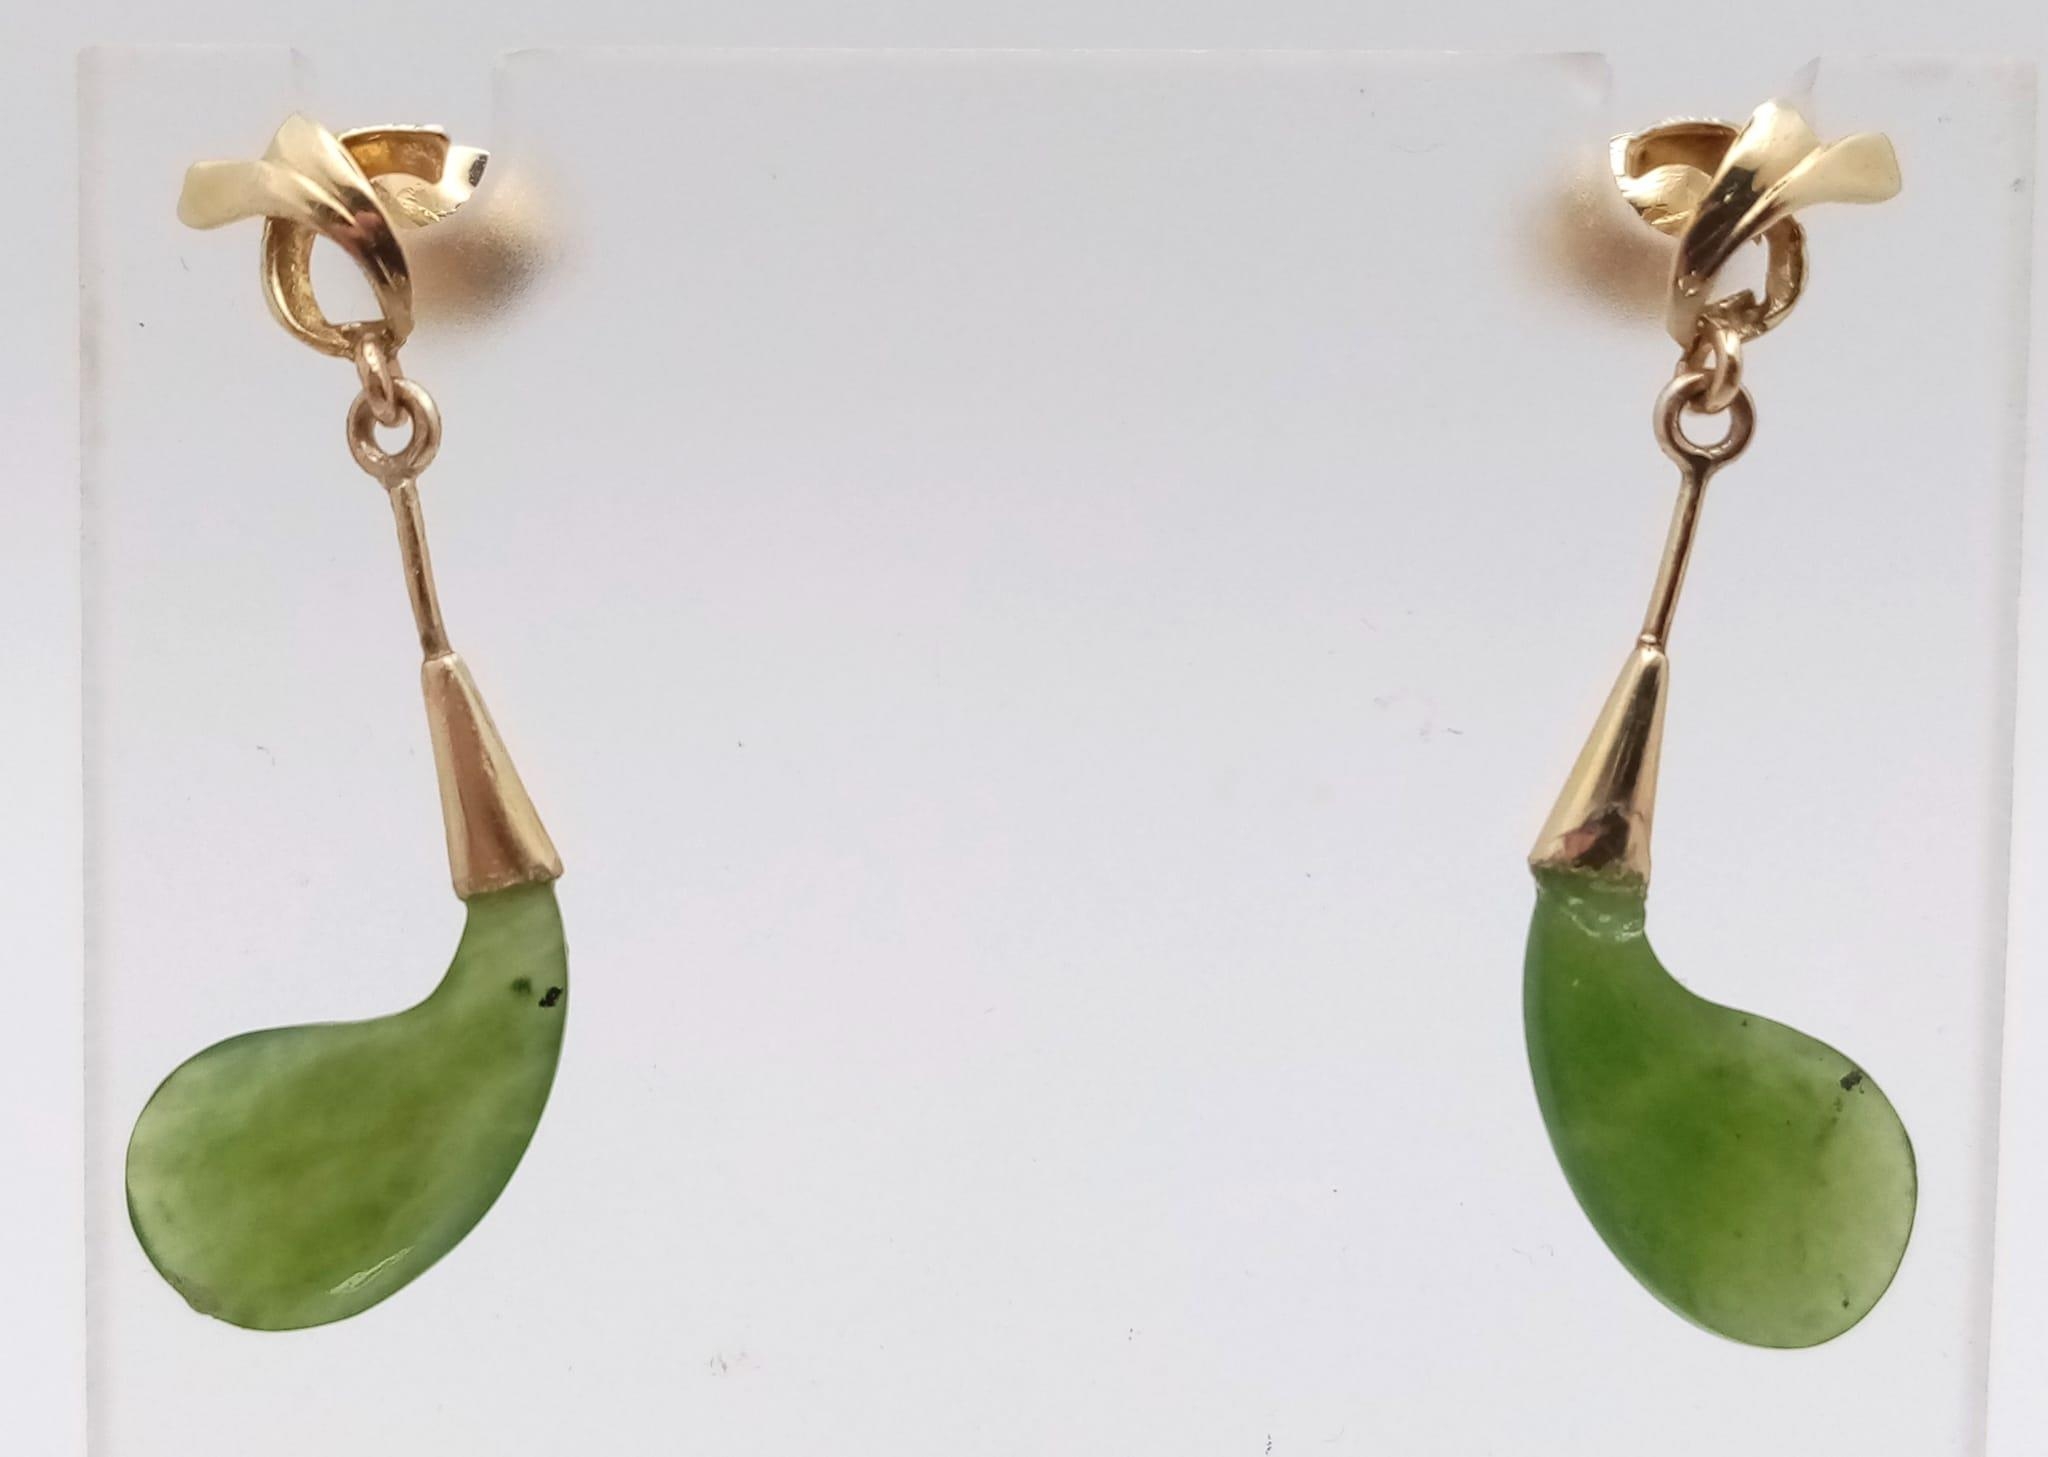 A Pair of 14K Yellow Gold and Jade Earrings. 2.4g total weight. - Image 2 of 5